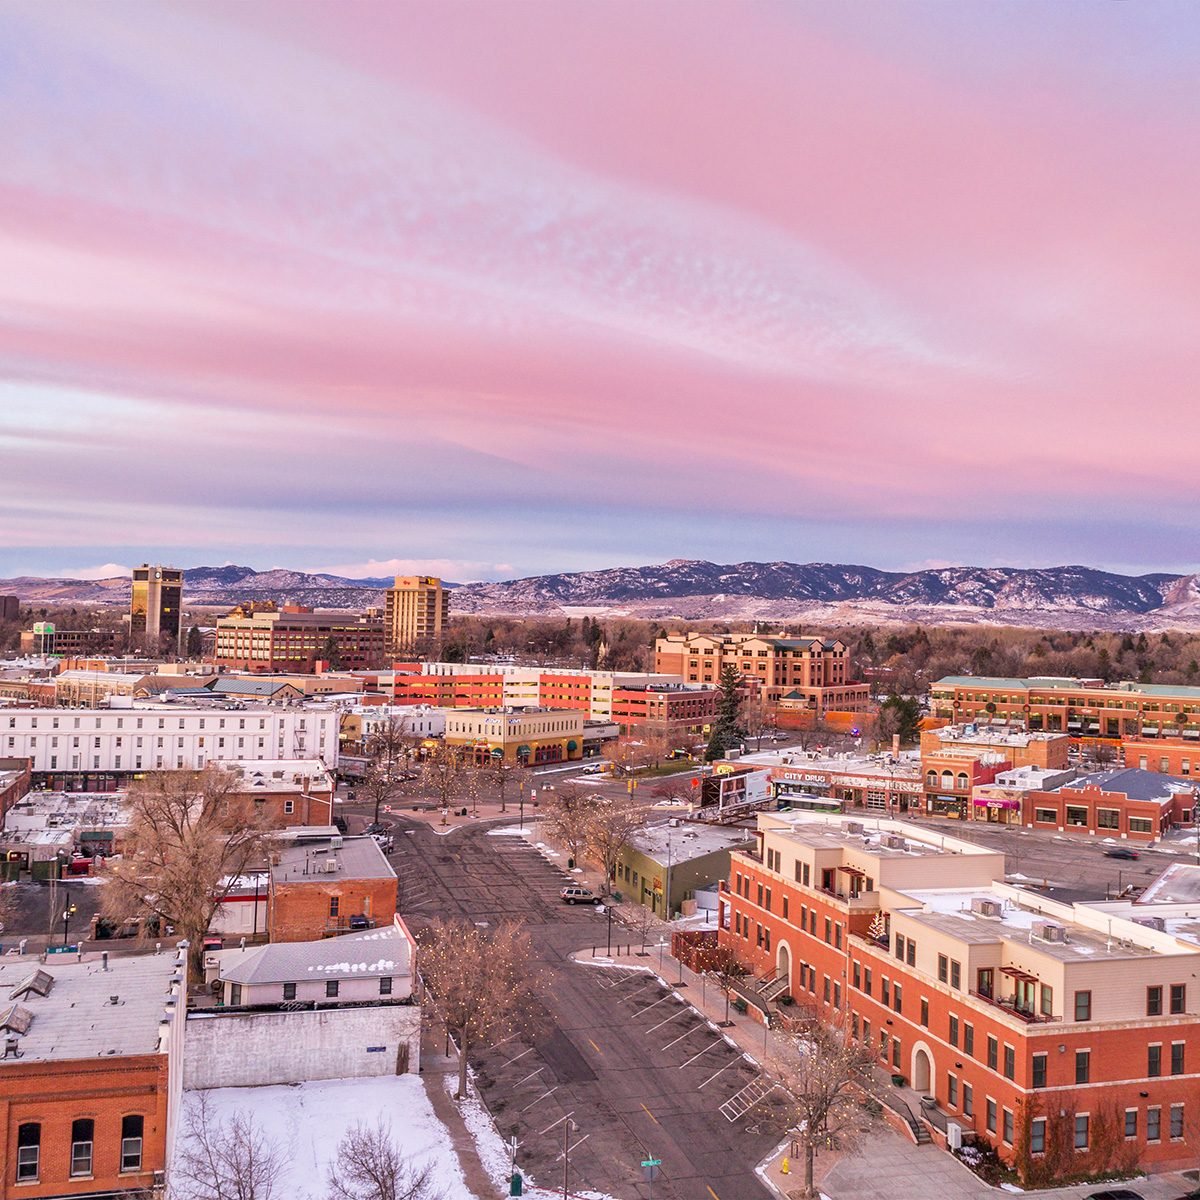 Downtown of Fort Collins, Colorado at cold winter dawn - aerial view with holiday lights and Rocky Mountains in background.